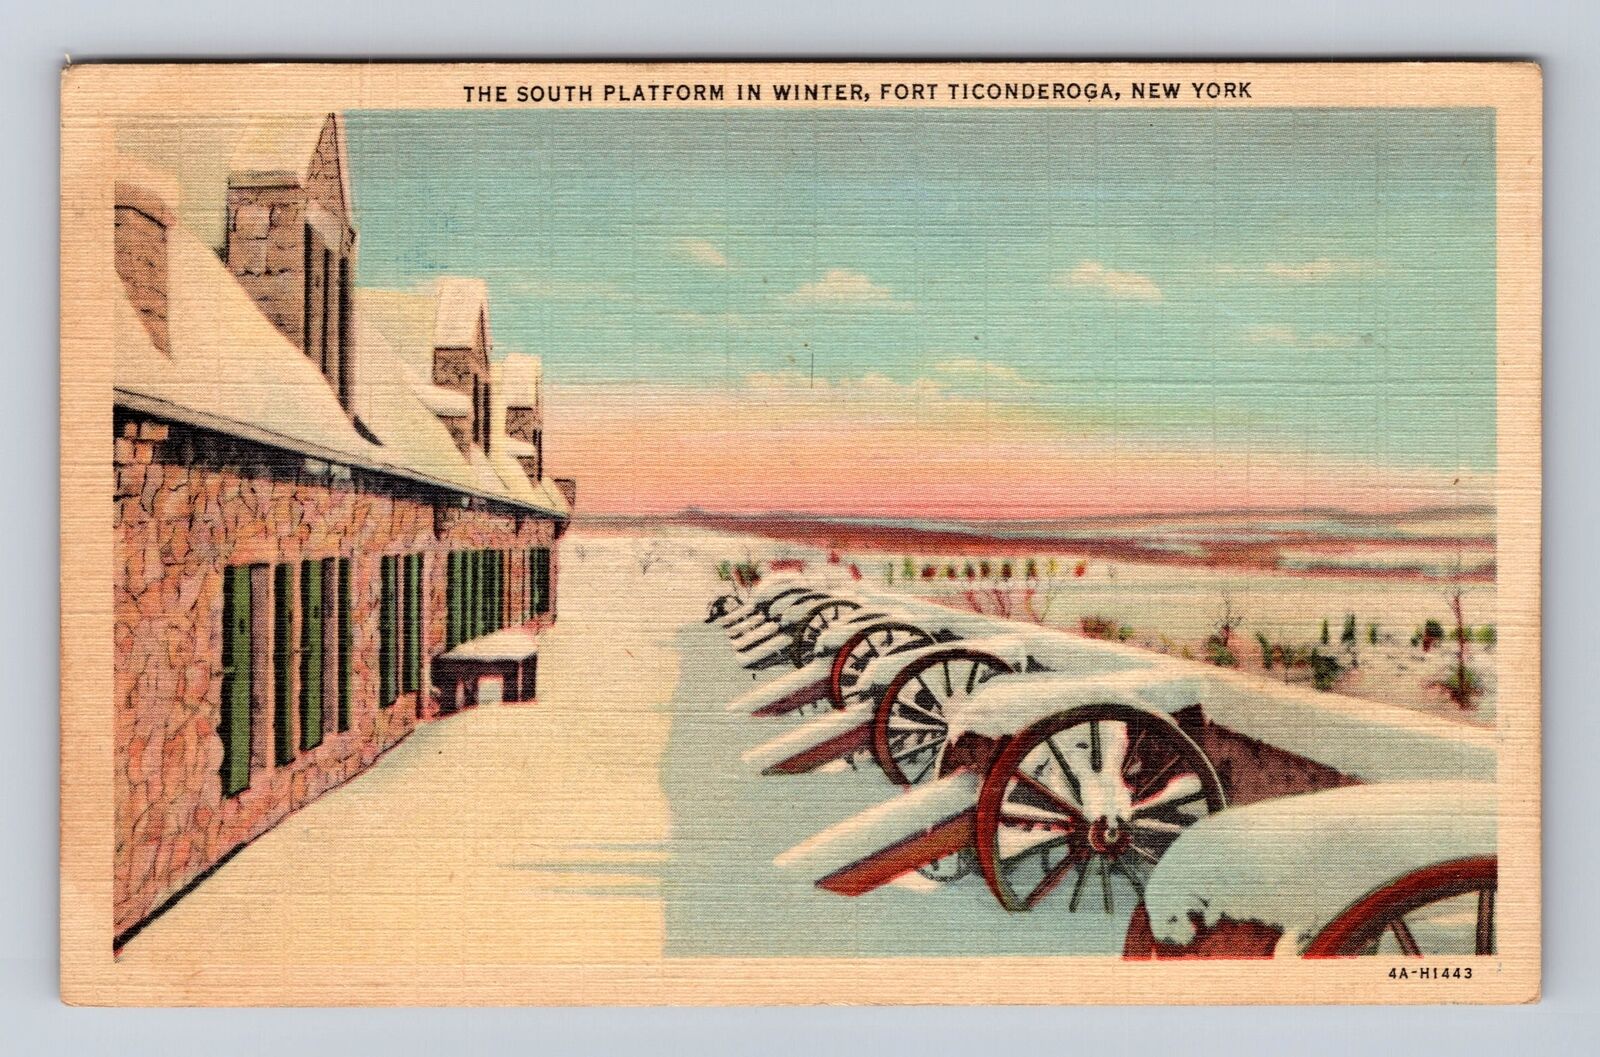 Fort Ticonderoga NY-New York, South Platform In Winter, Canons, Vintage Postcard